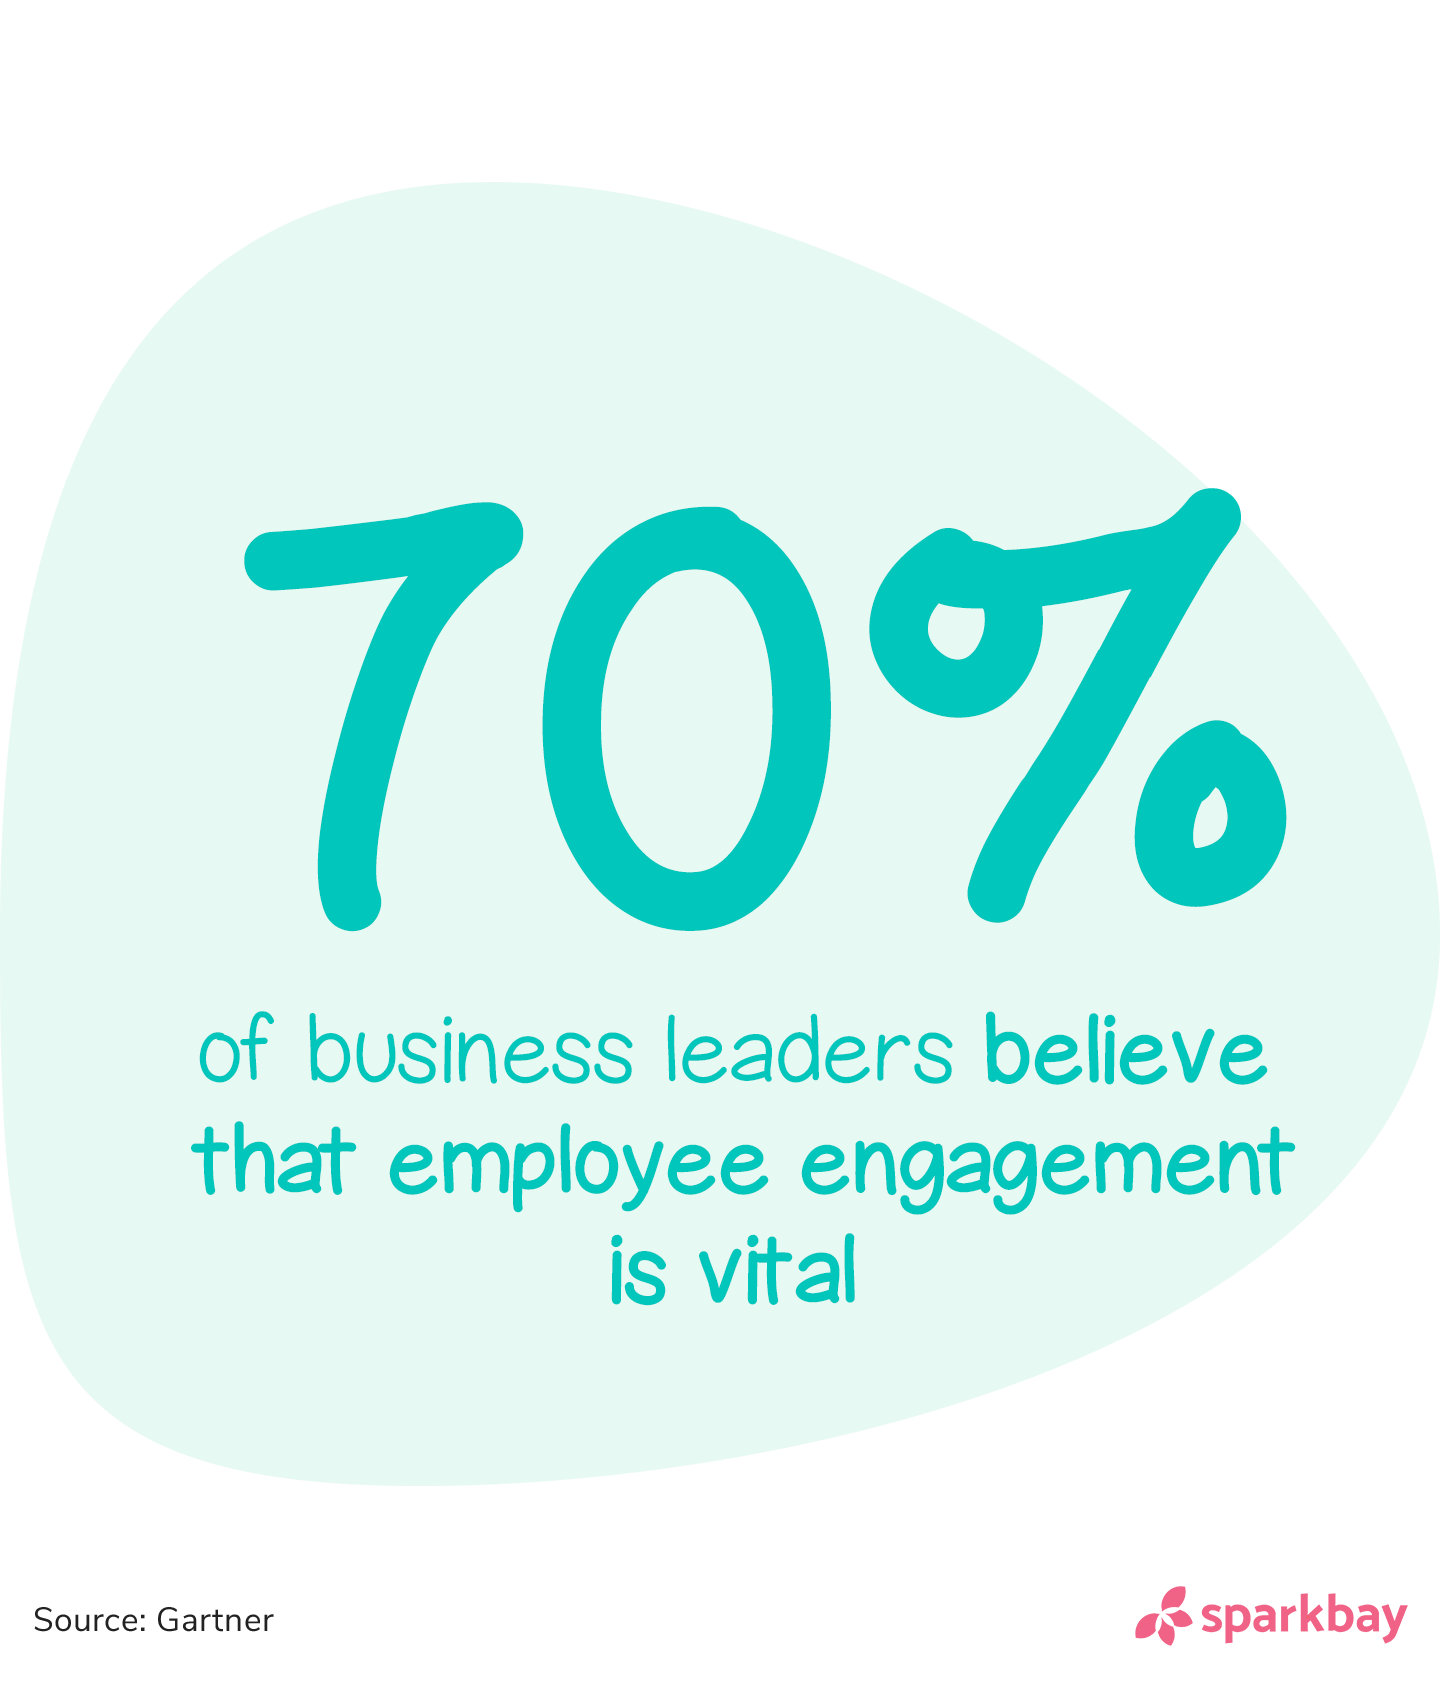 Employee engagement statistics: 70% of business leaders believe that employee engagement is vital.